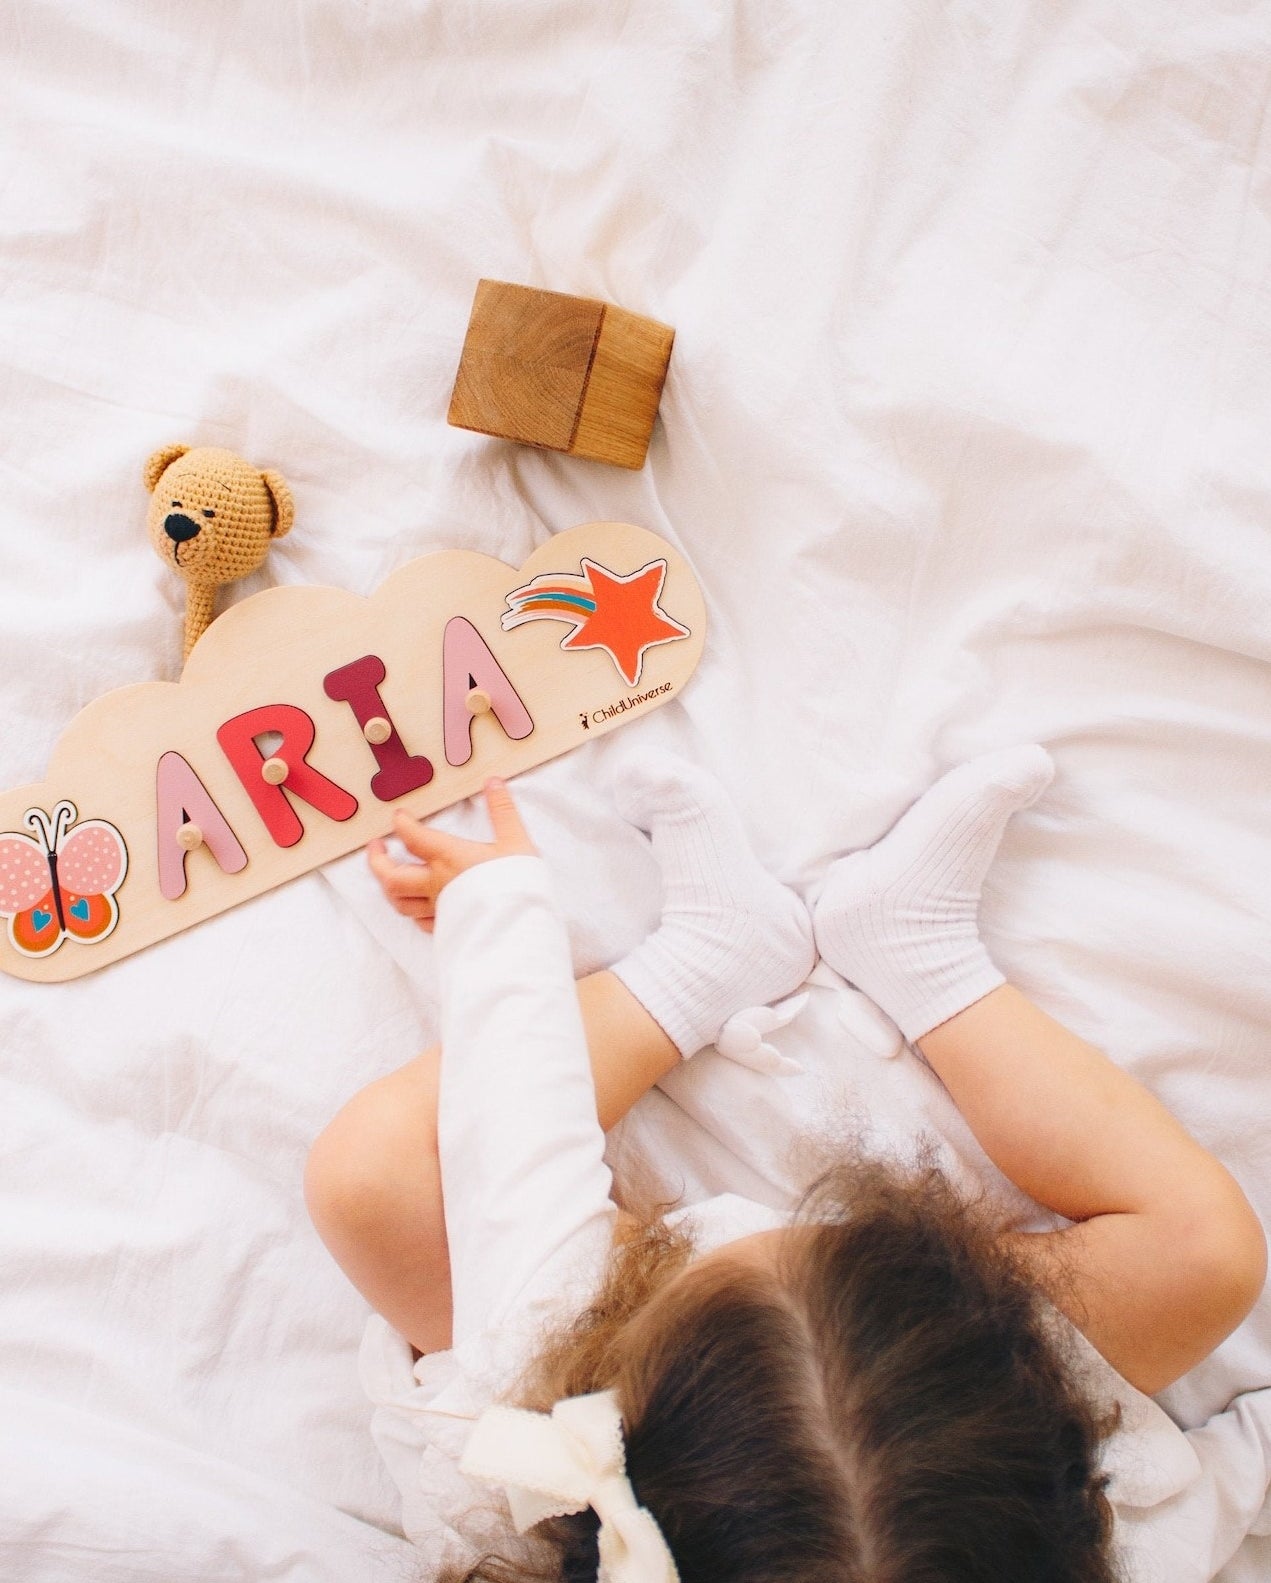 A child playing with the wooden name puzzle